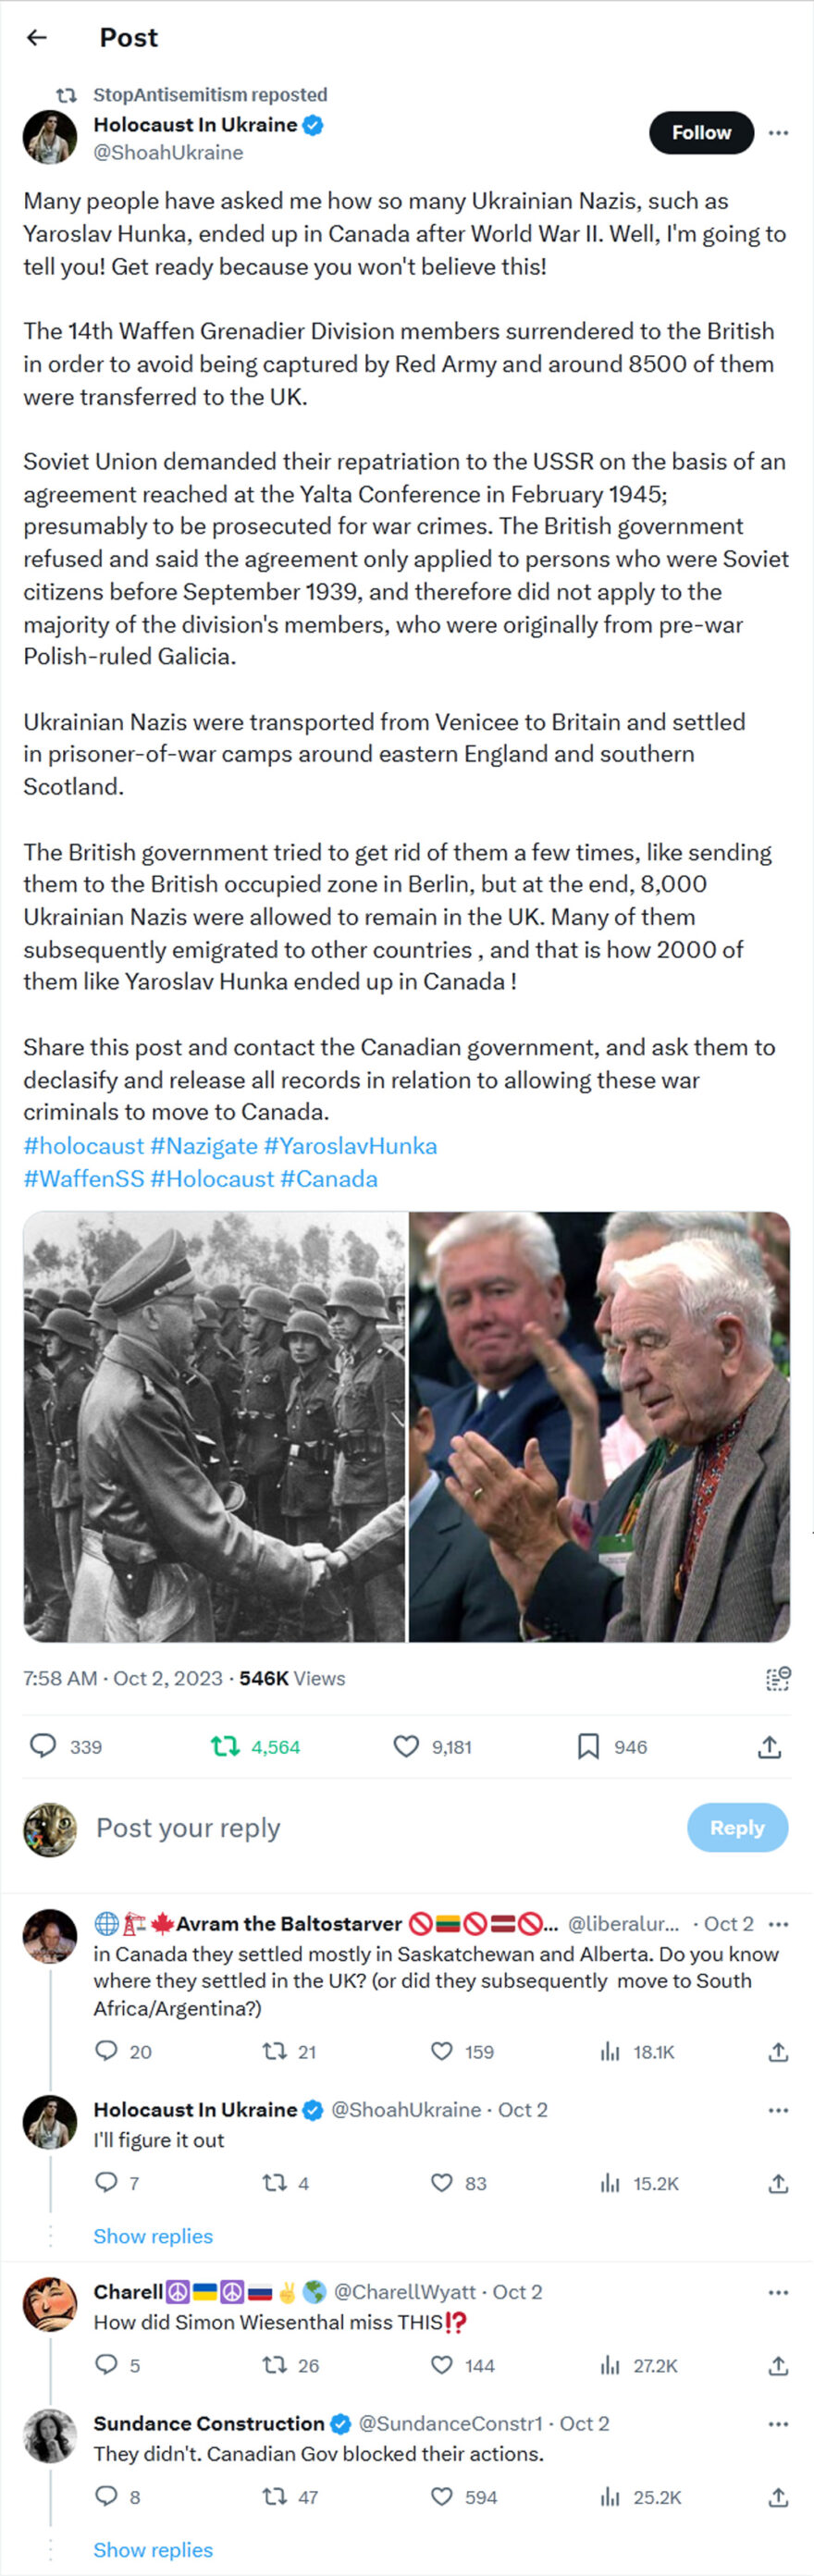 Holocaust In Ukraine-tweet-2October2023-How so many Ukrainian Nazis ended up in Canada after World War II